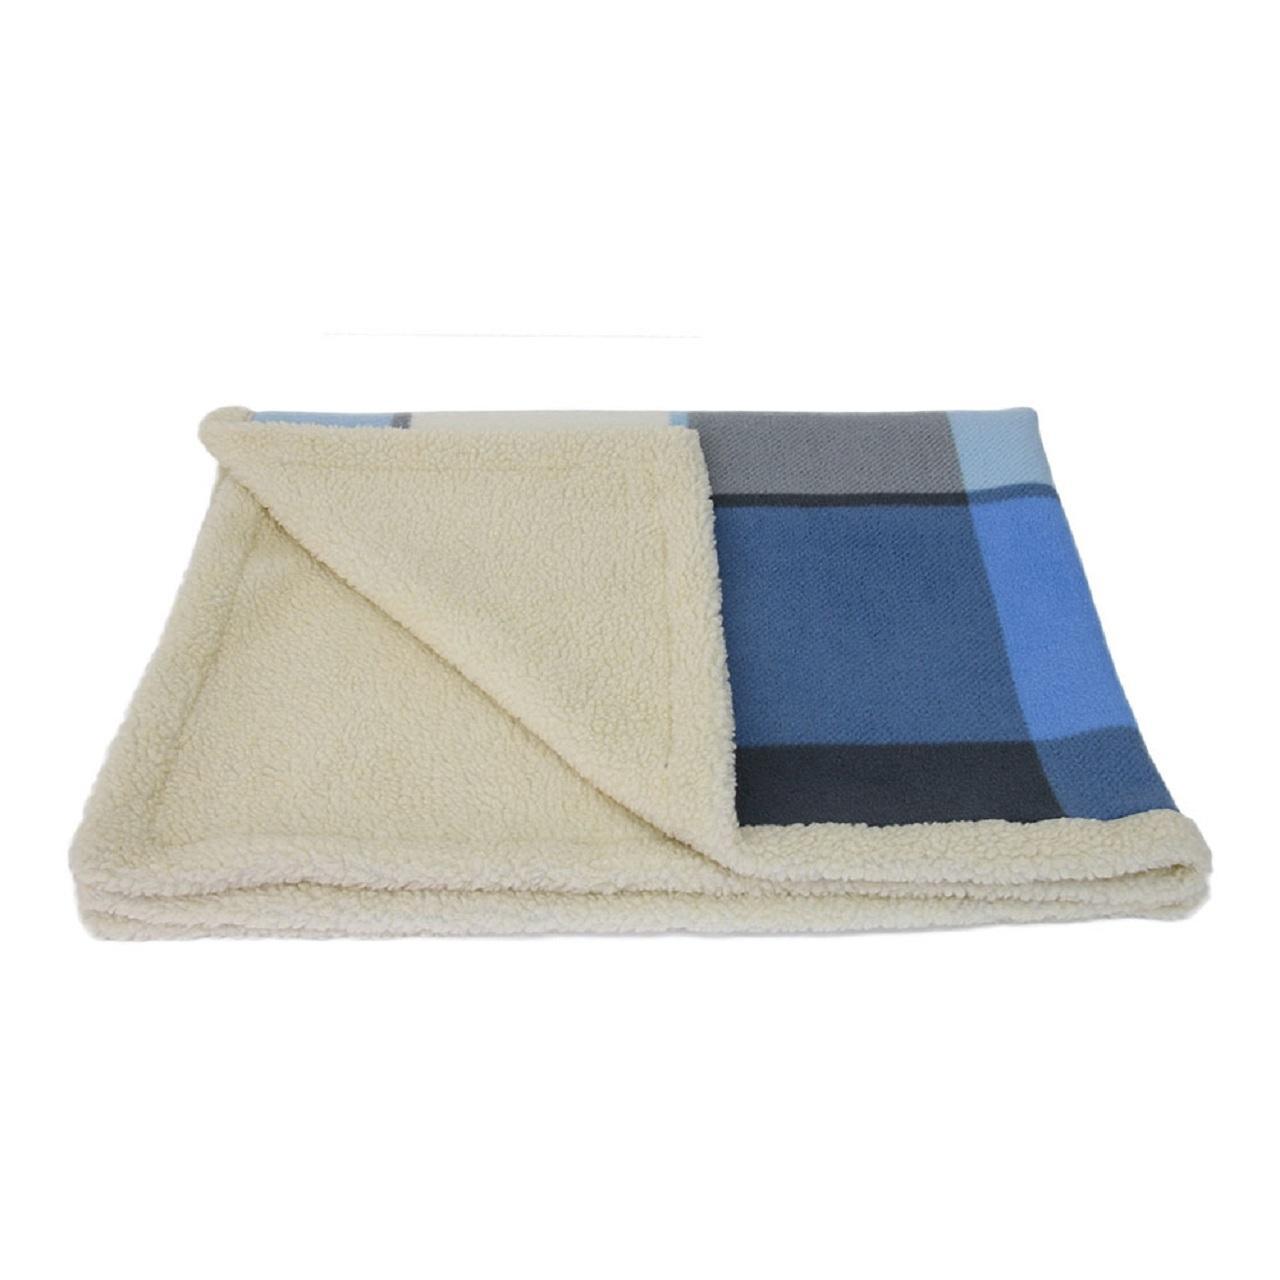 An image of Earthbound Sherpa Pet Blanket Blue Check Extra Large